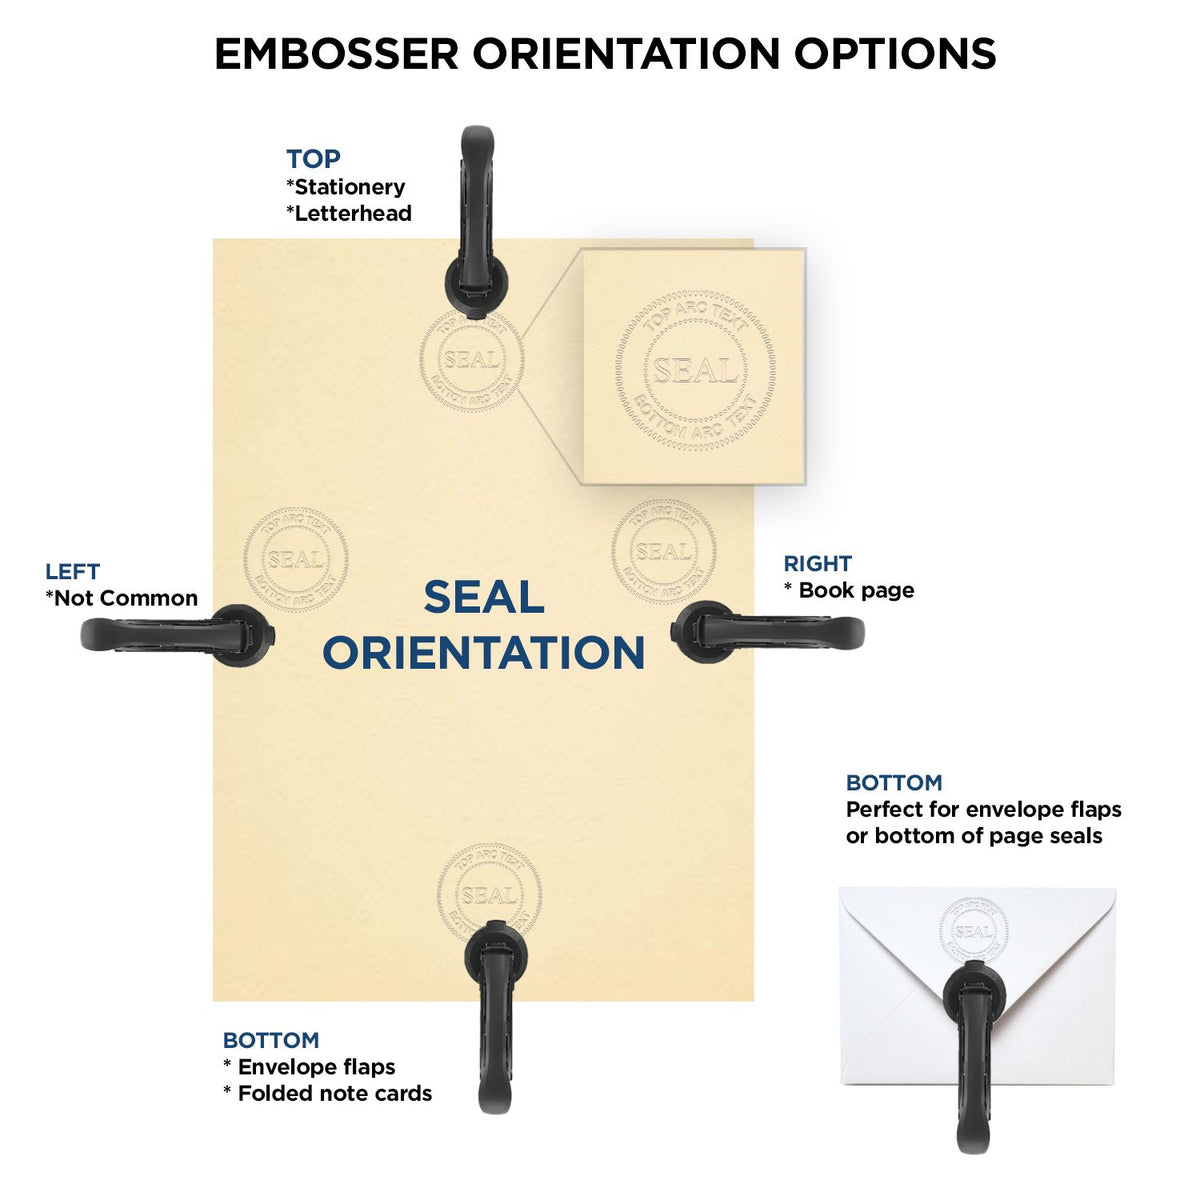 An infographic for the Gift Kansas Engineer Seal showing embosser orientation, this is showing examples of a top, bottom, right and left insert.